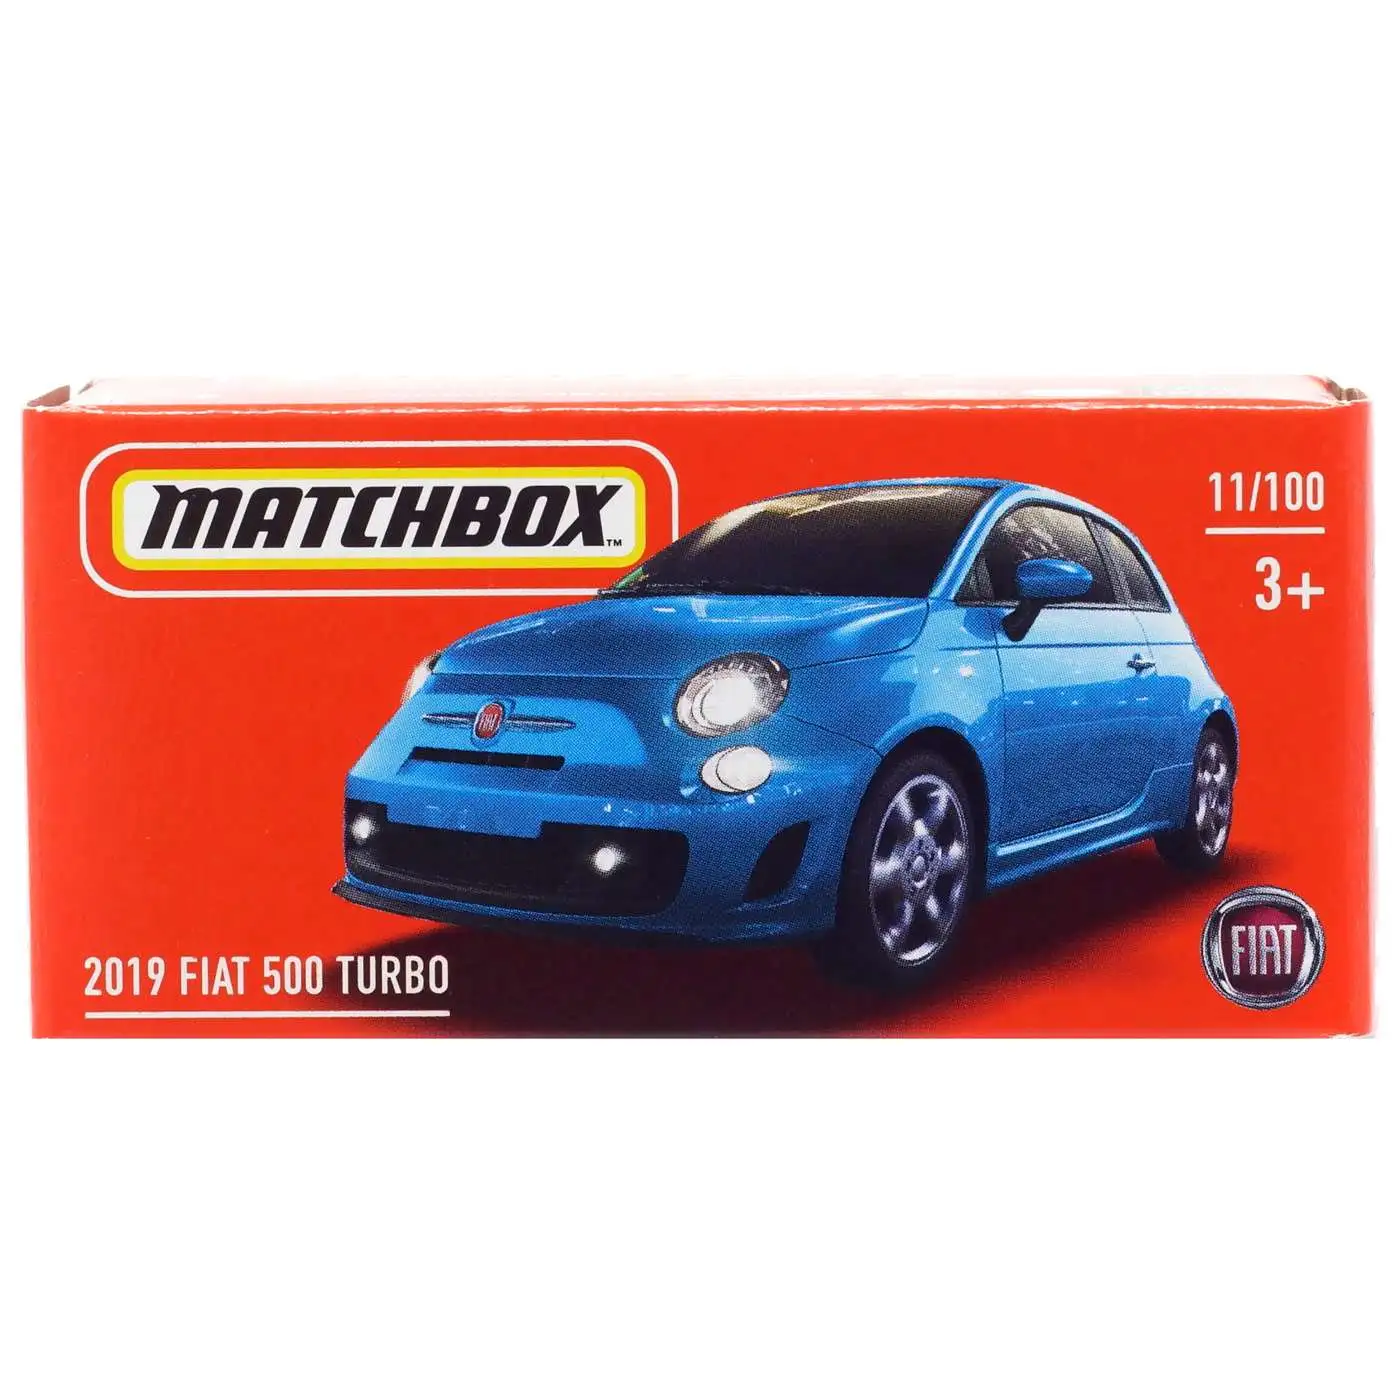 NEW in BOX 2021 issue MATCHBOX POWER GRABS #19 2019 Fiat 500 Turbo 